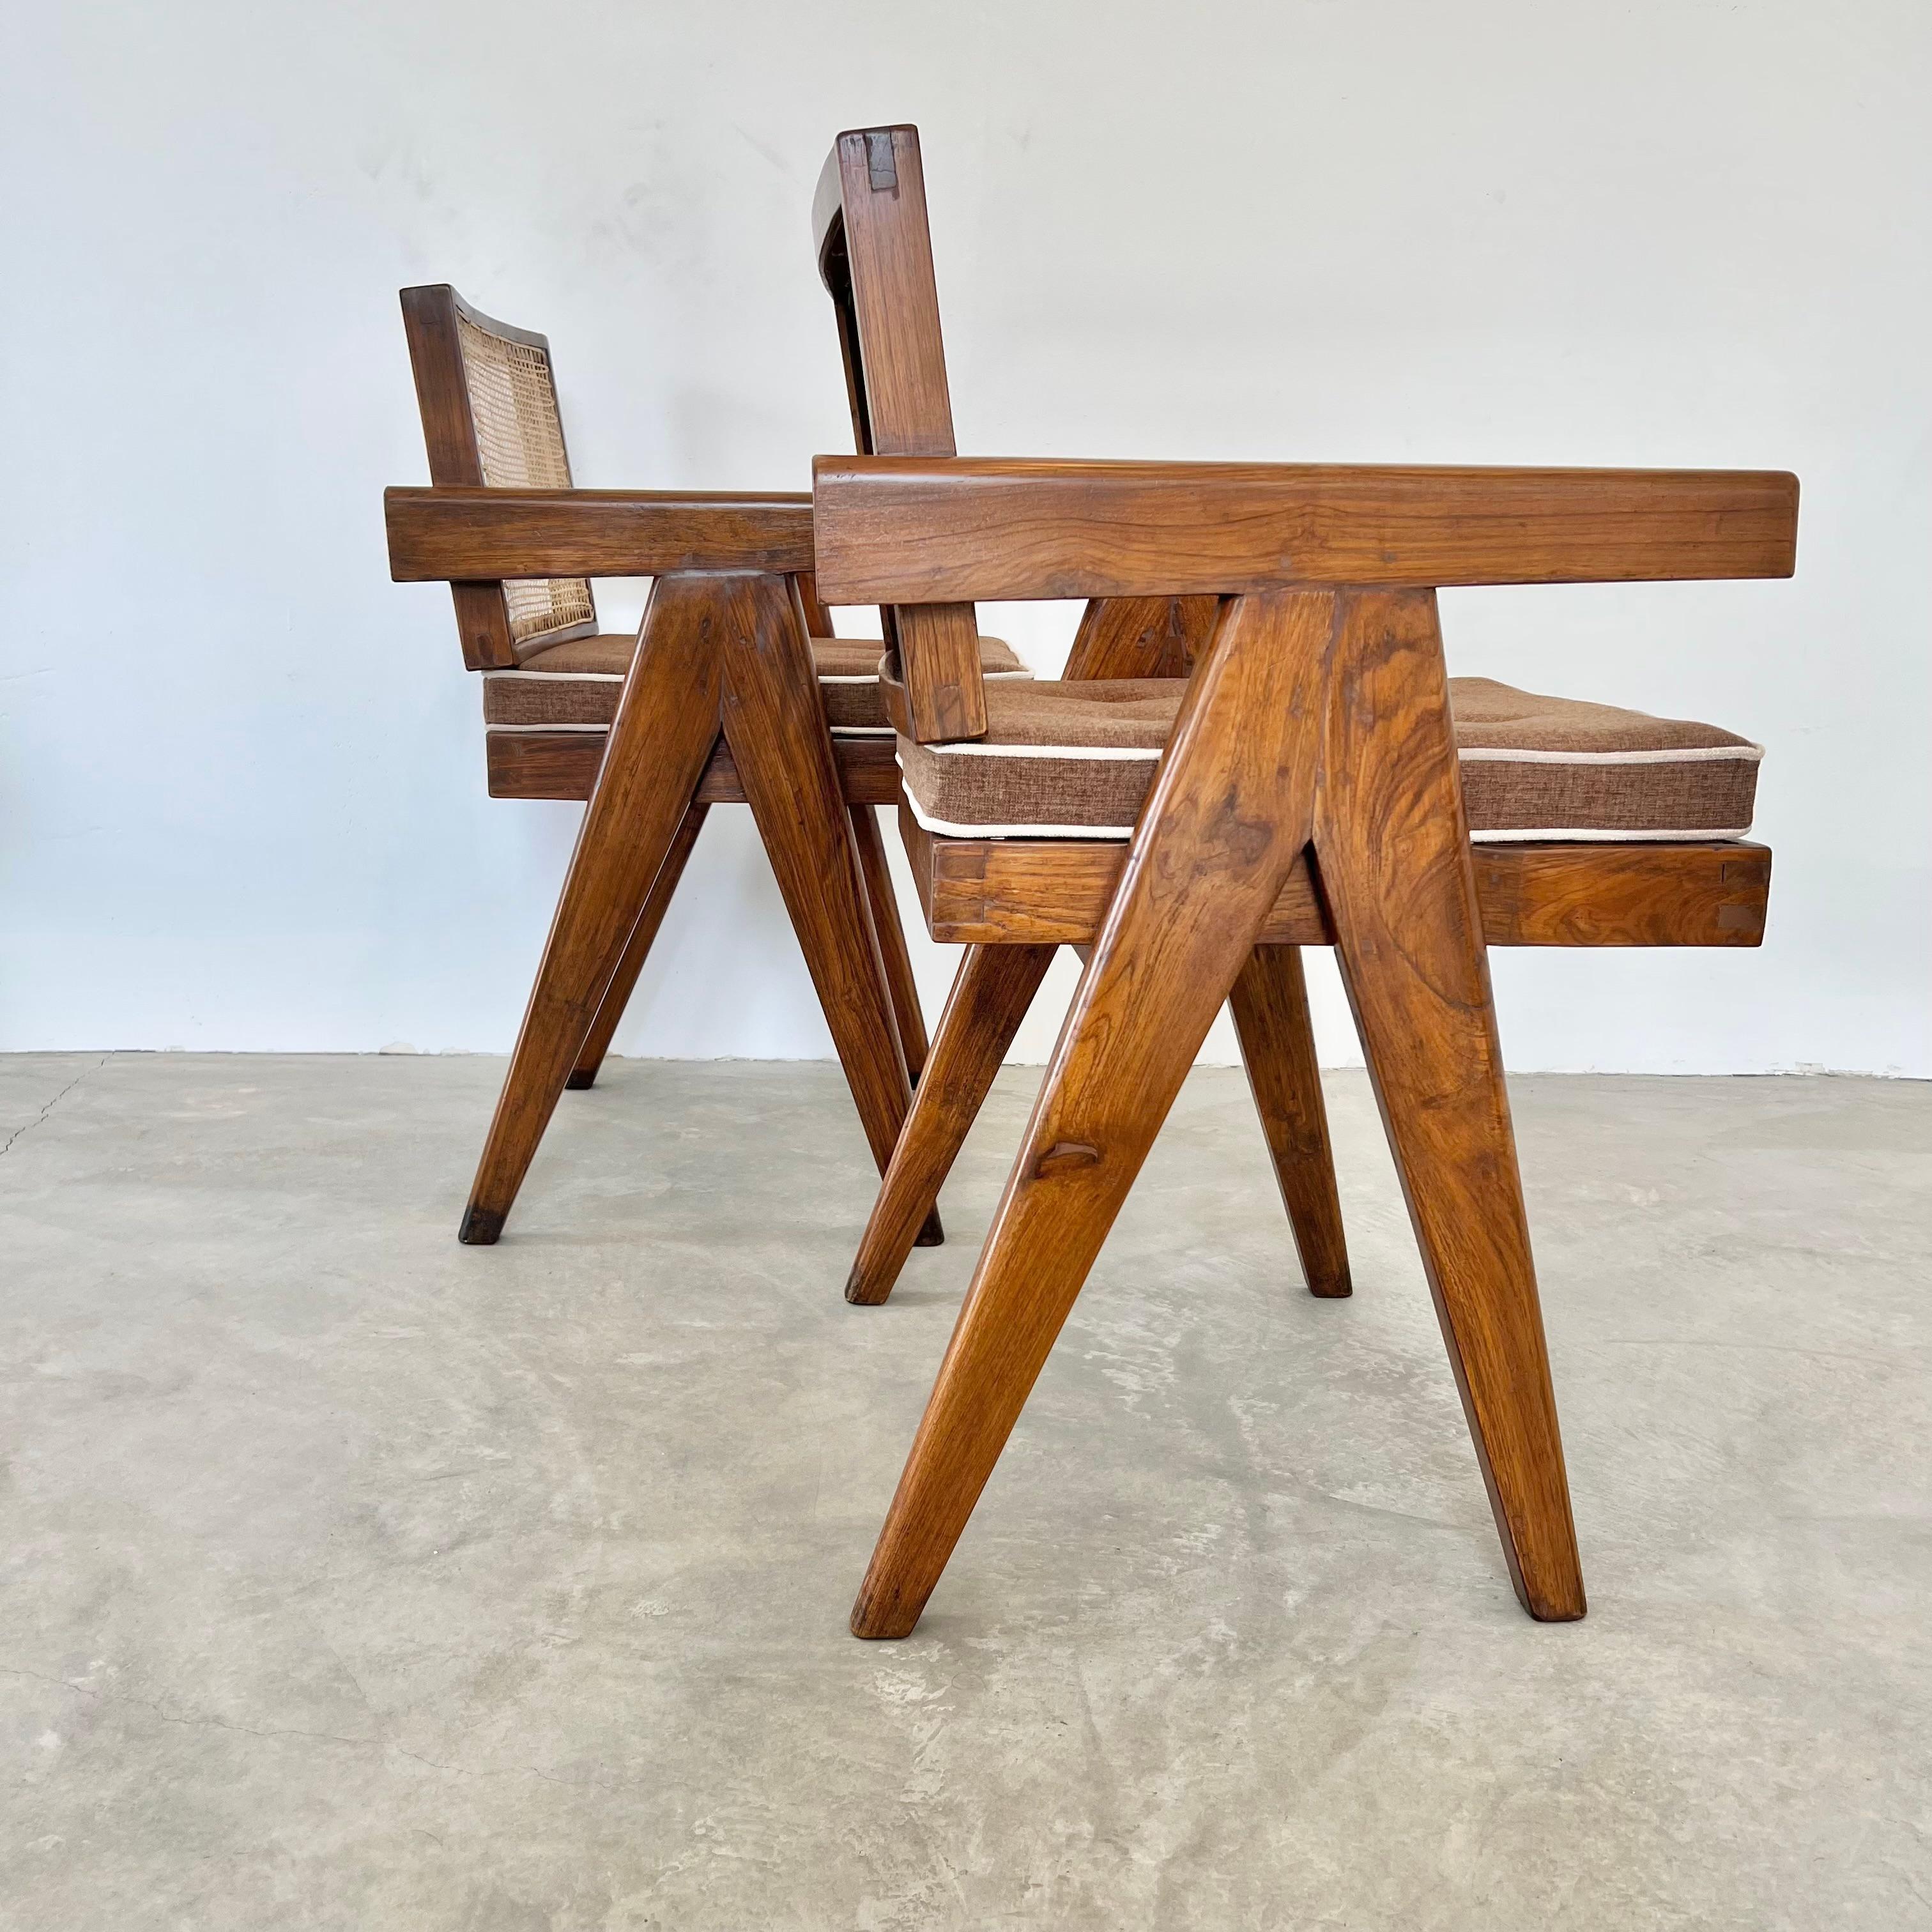 Pierre Jeanneret Office Chairs, 1950s Chandigargh For Sale 3